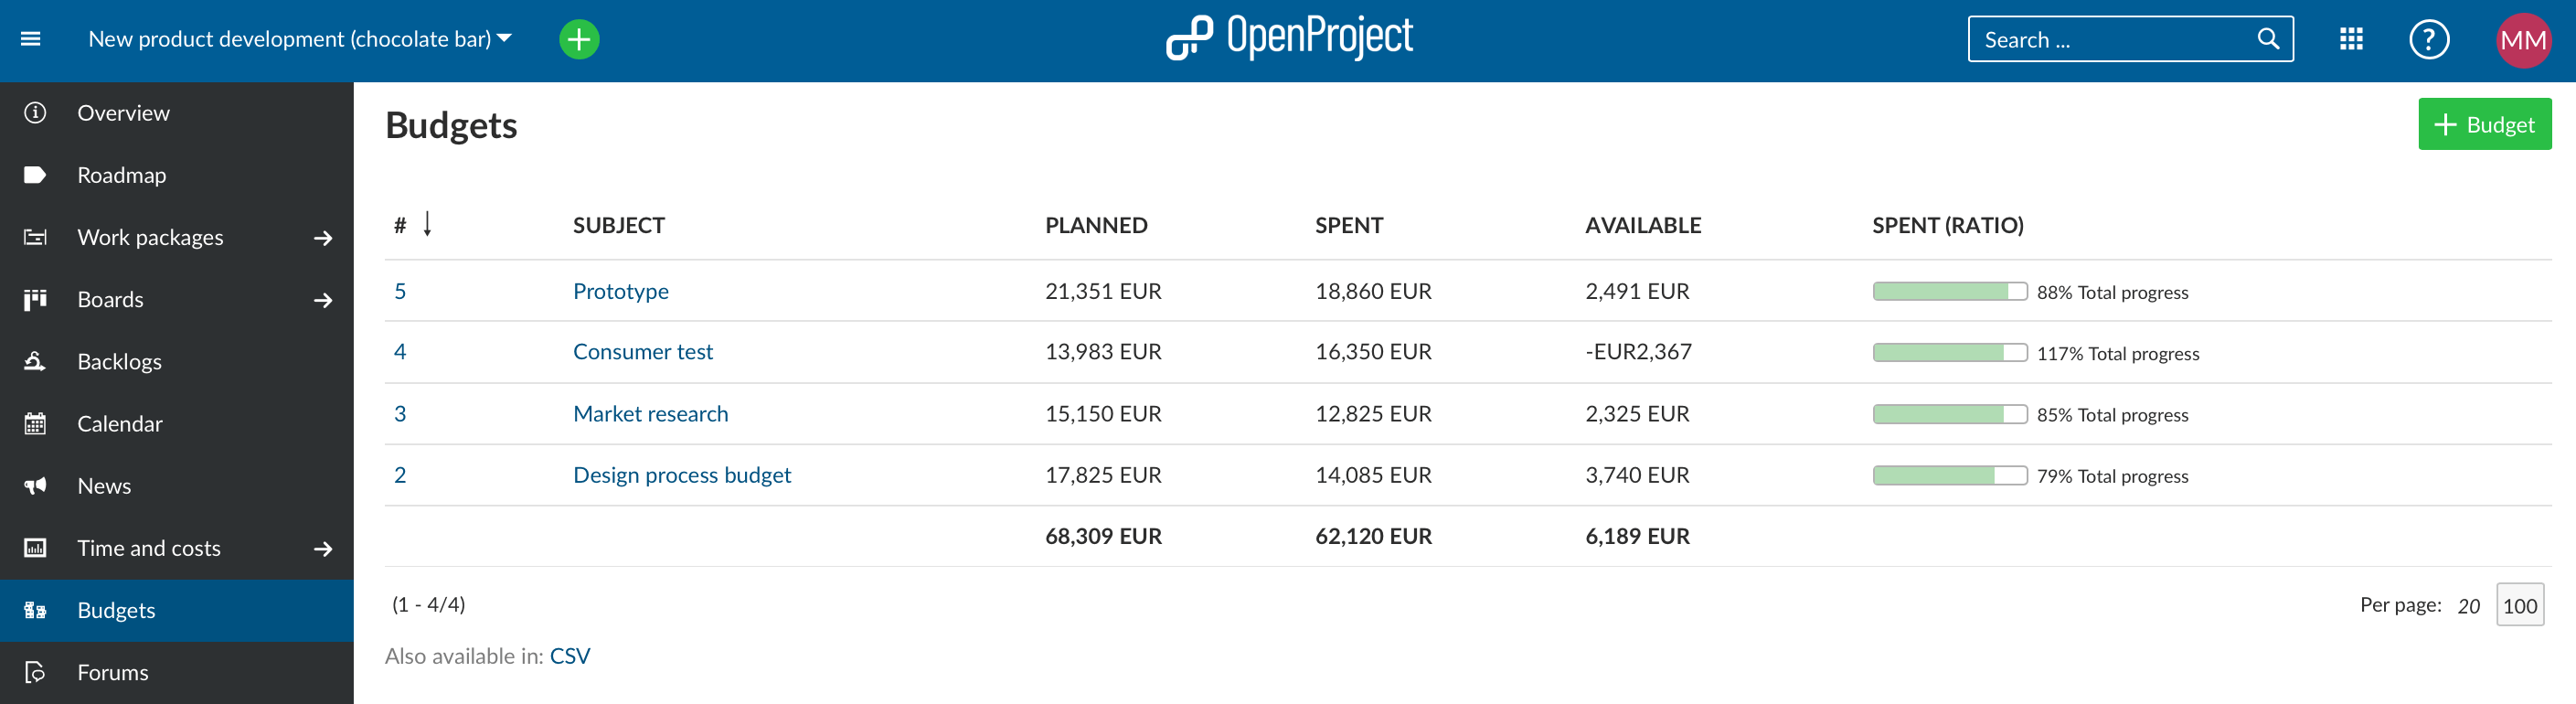 openproject-budgeting